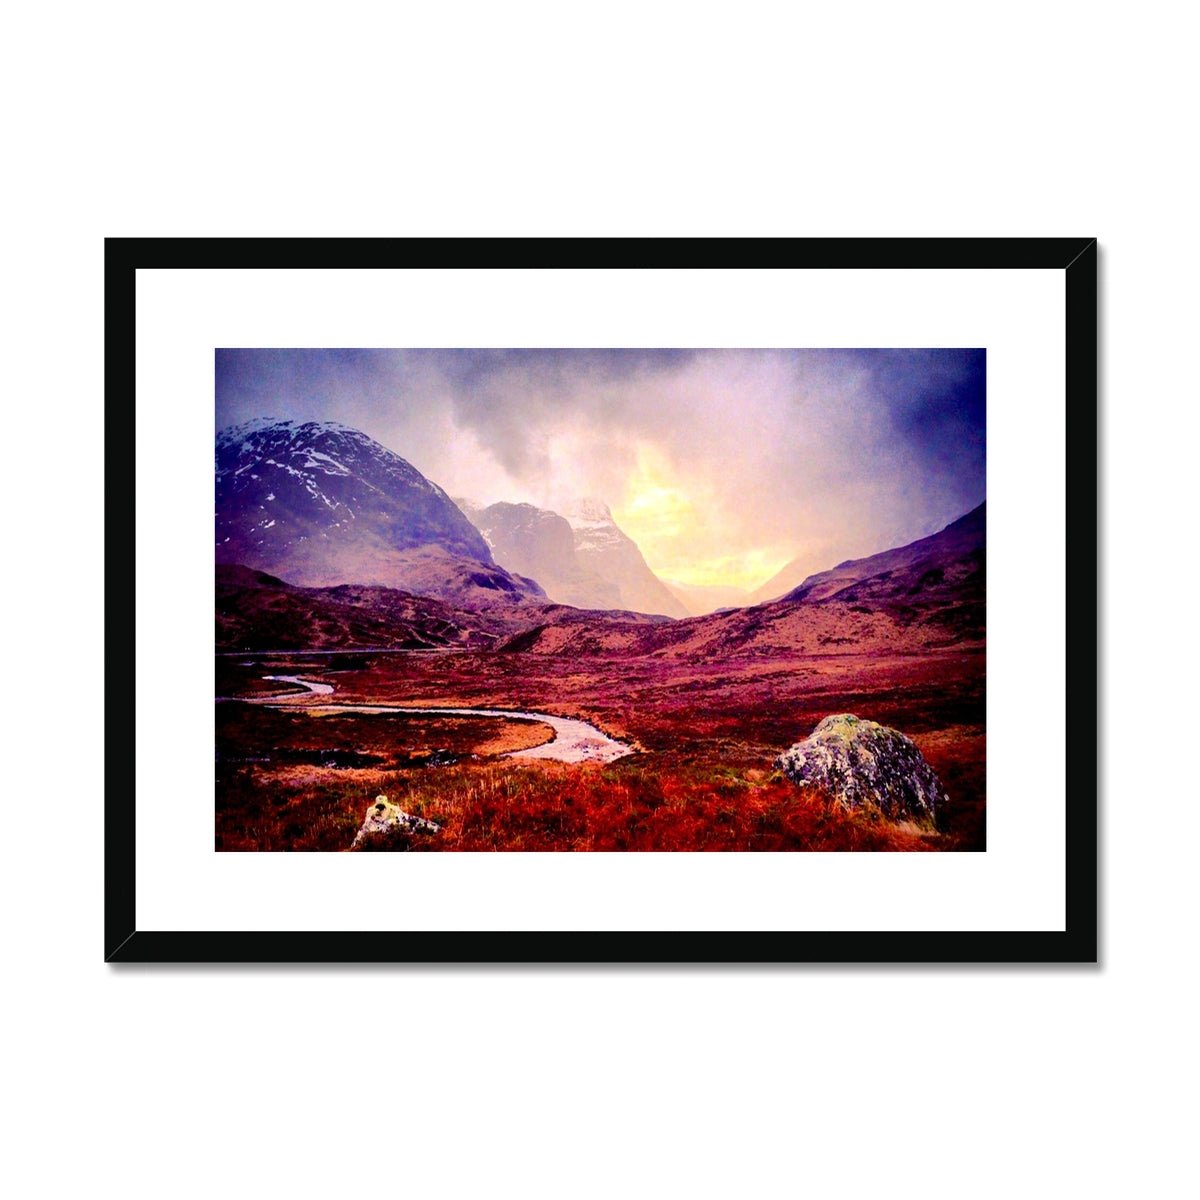 A Brooding Glencoe Painting | Framed & Mounted Prints From Scotland-Framed & Mounted Prints-Glencoe Art Gallery-A2 Landscape-Black Frame-Paintings, Prints, Homeware, Art Gifts From Scotland By Scottish Artist Kevin Hunter